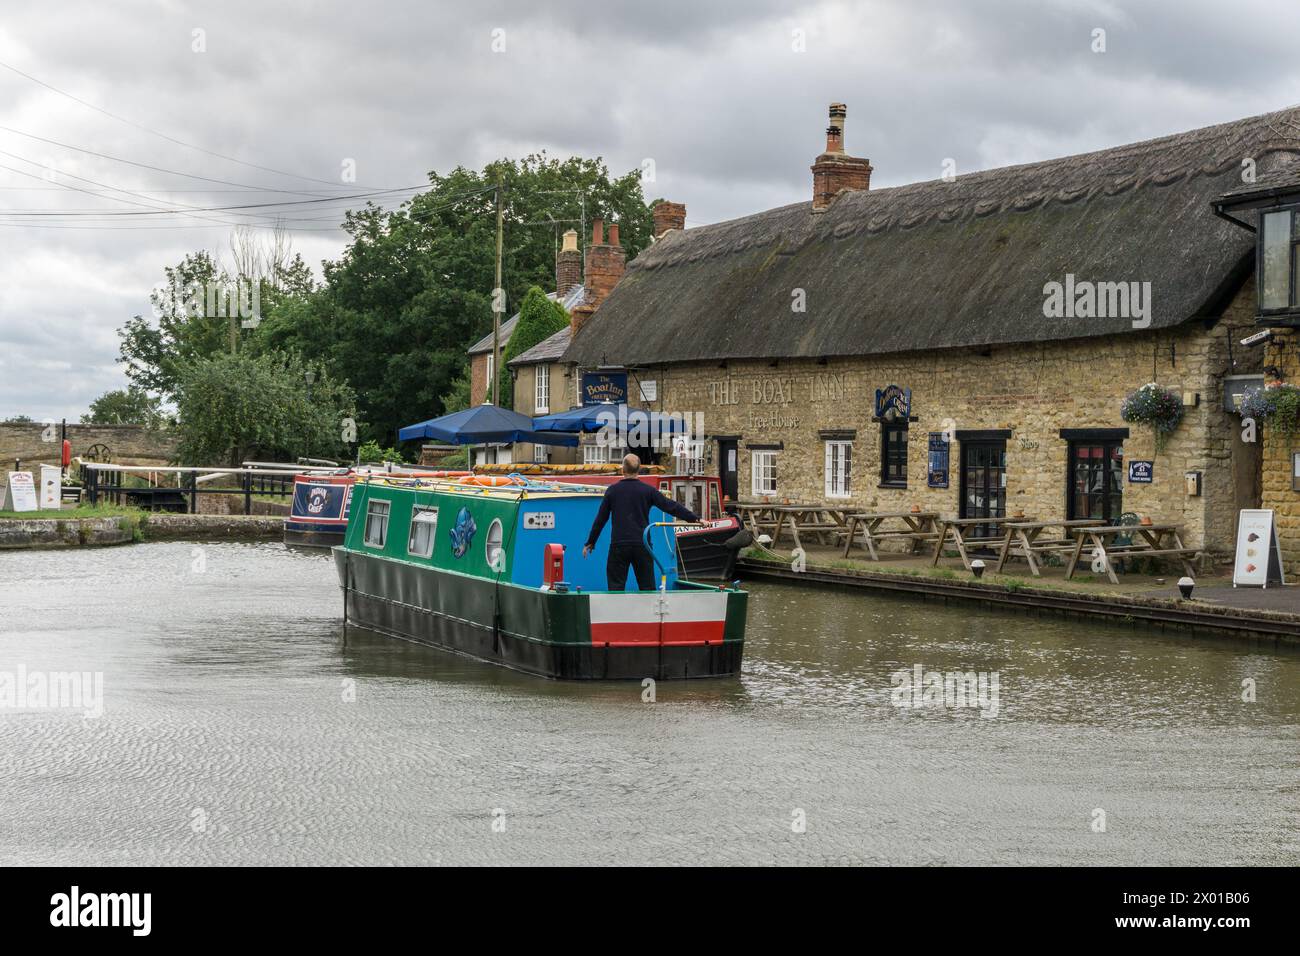 Narrowboat navigating the Grand Union canal with the Boat Inn in the background, Stoke Bruerne, Northamptonshire, UK Stock Photo